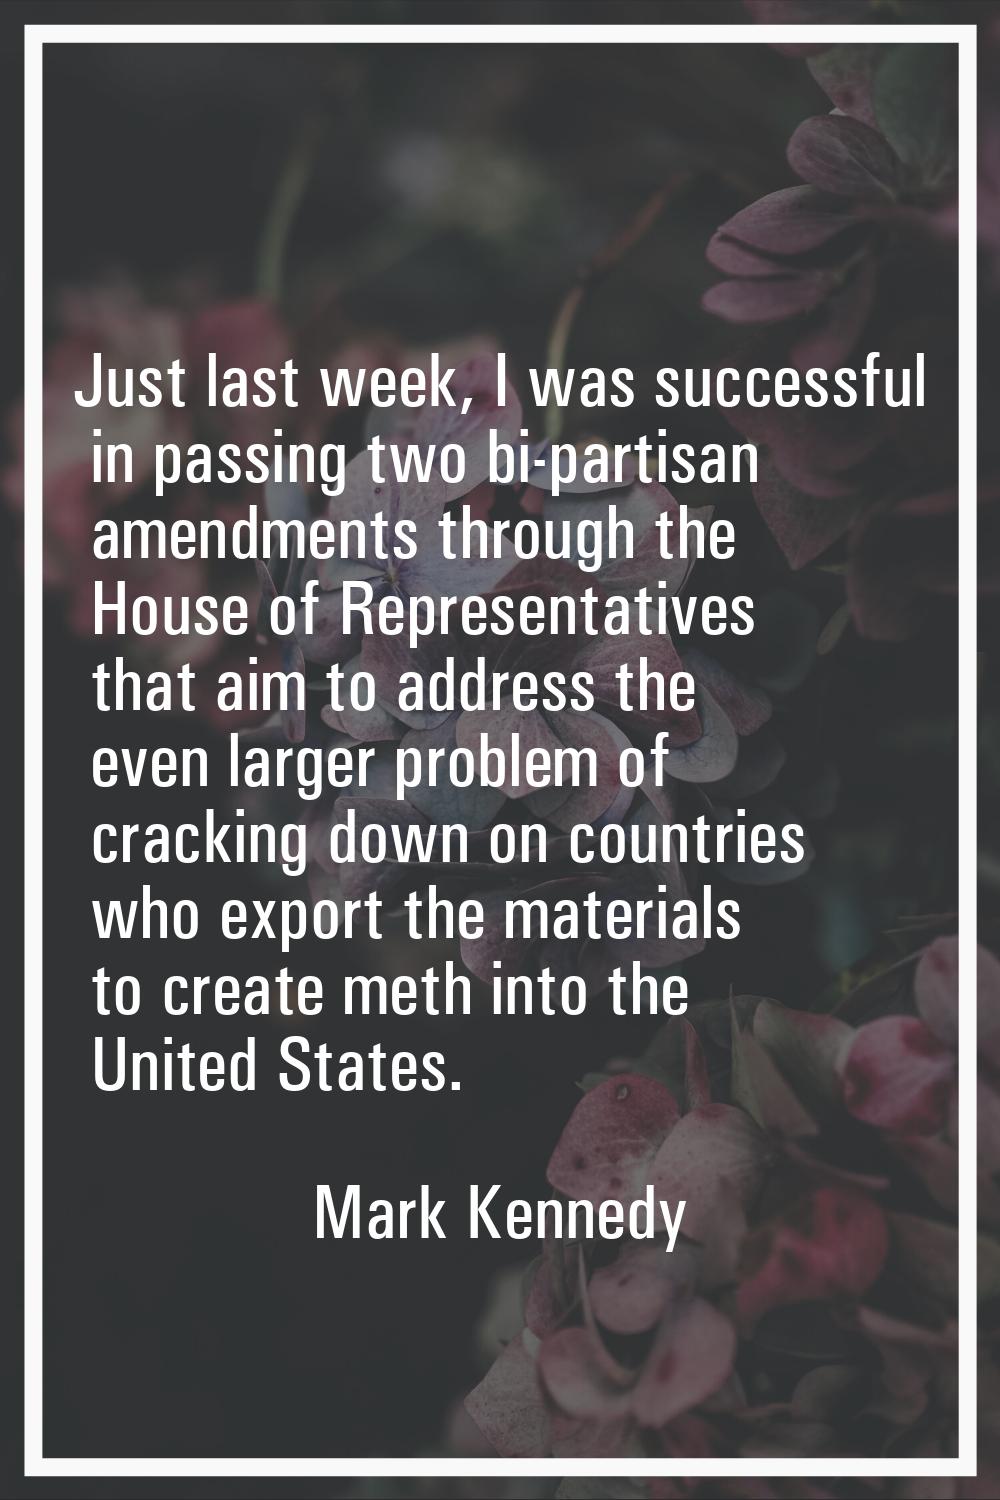 Just last week, I was successful in passing two bi-partisan amendments through the House of Represe